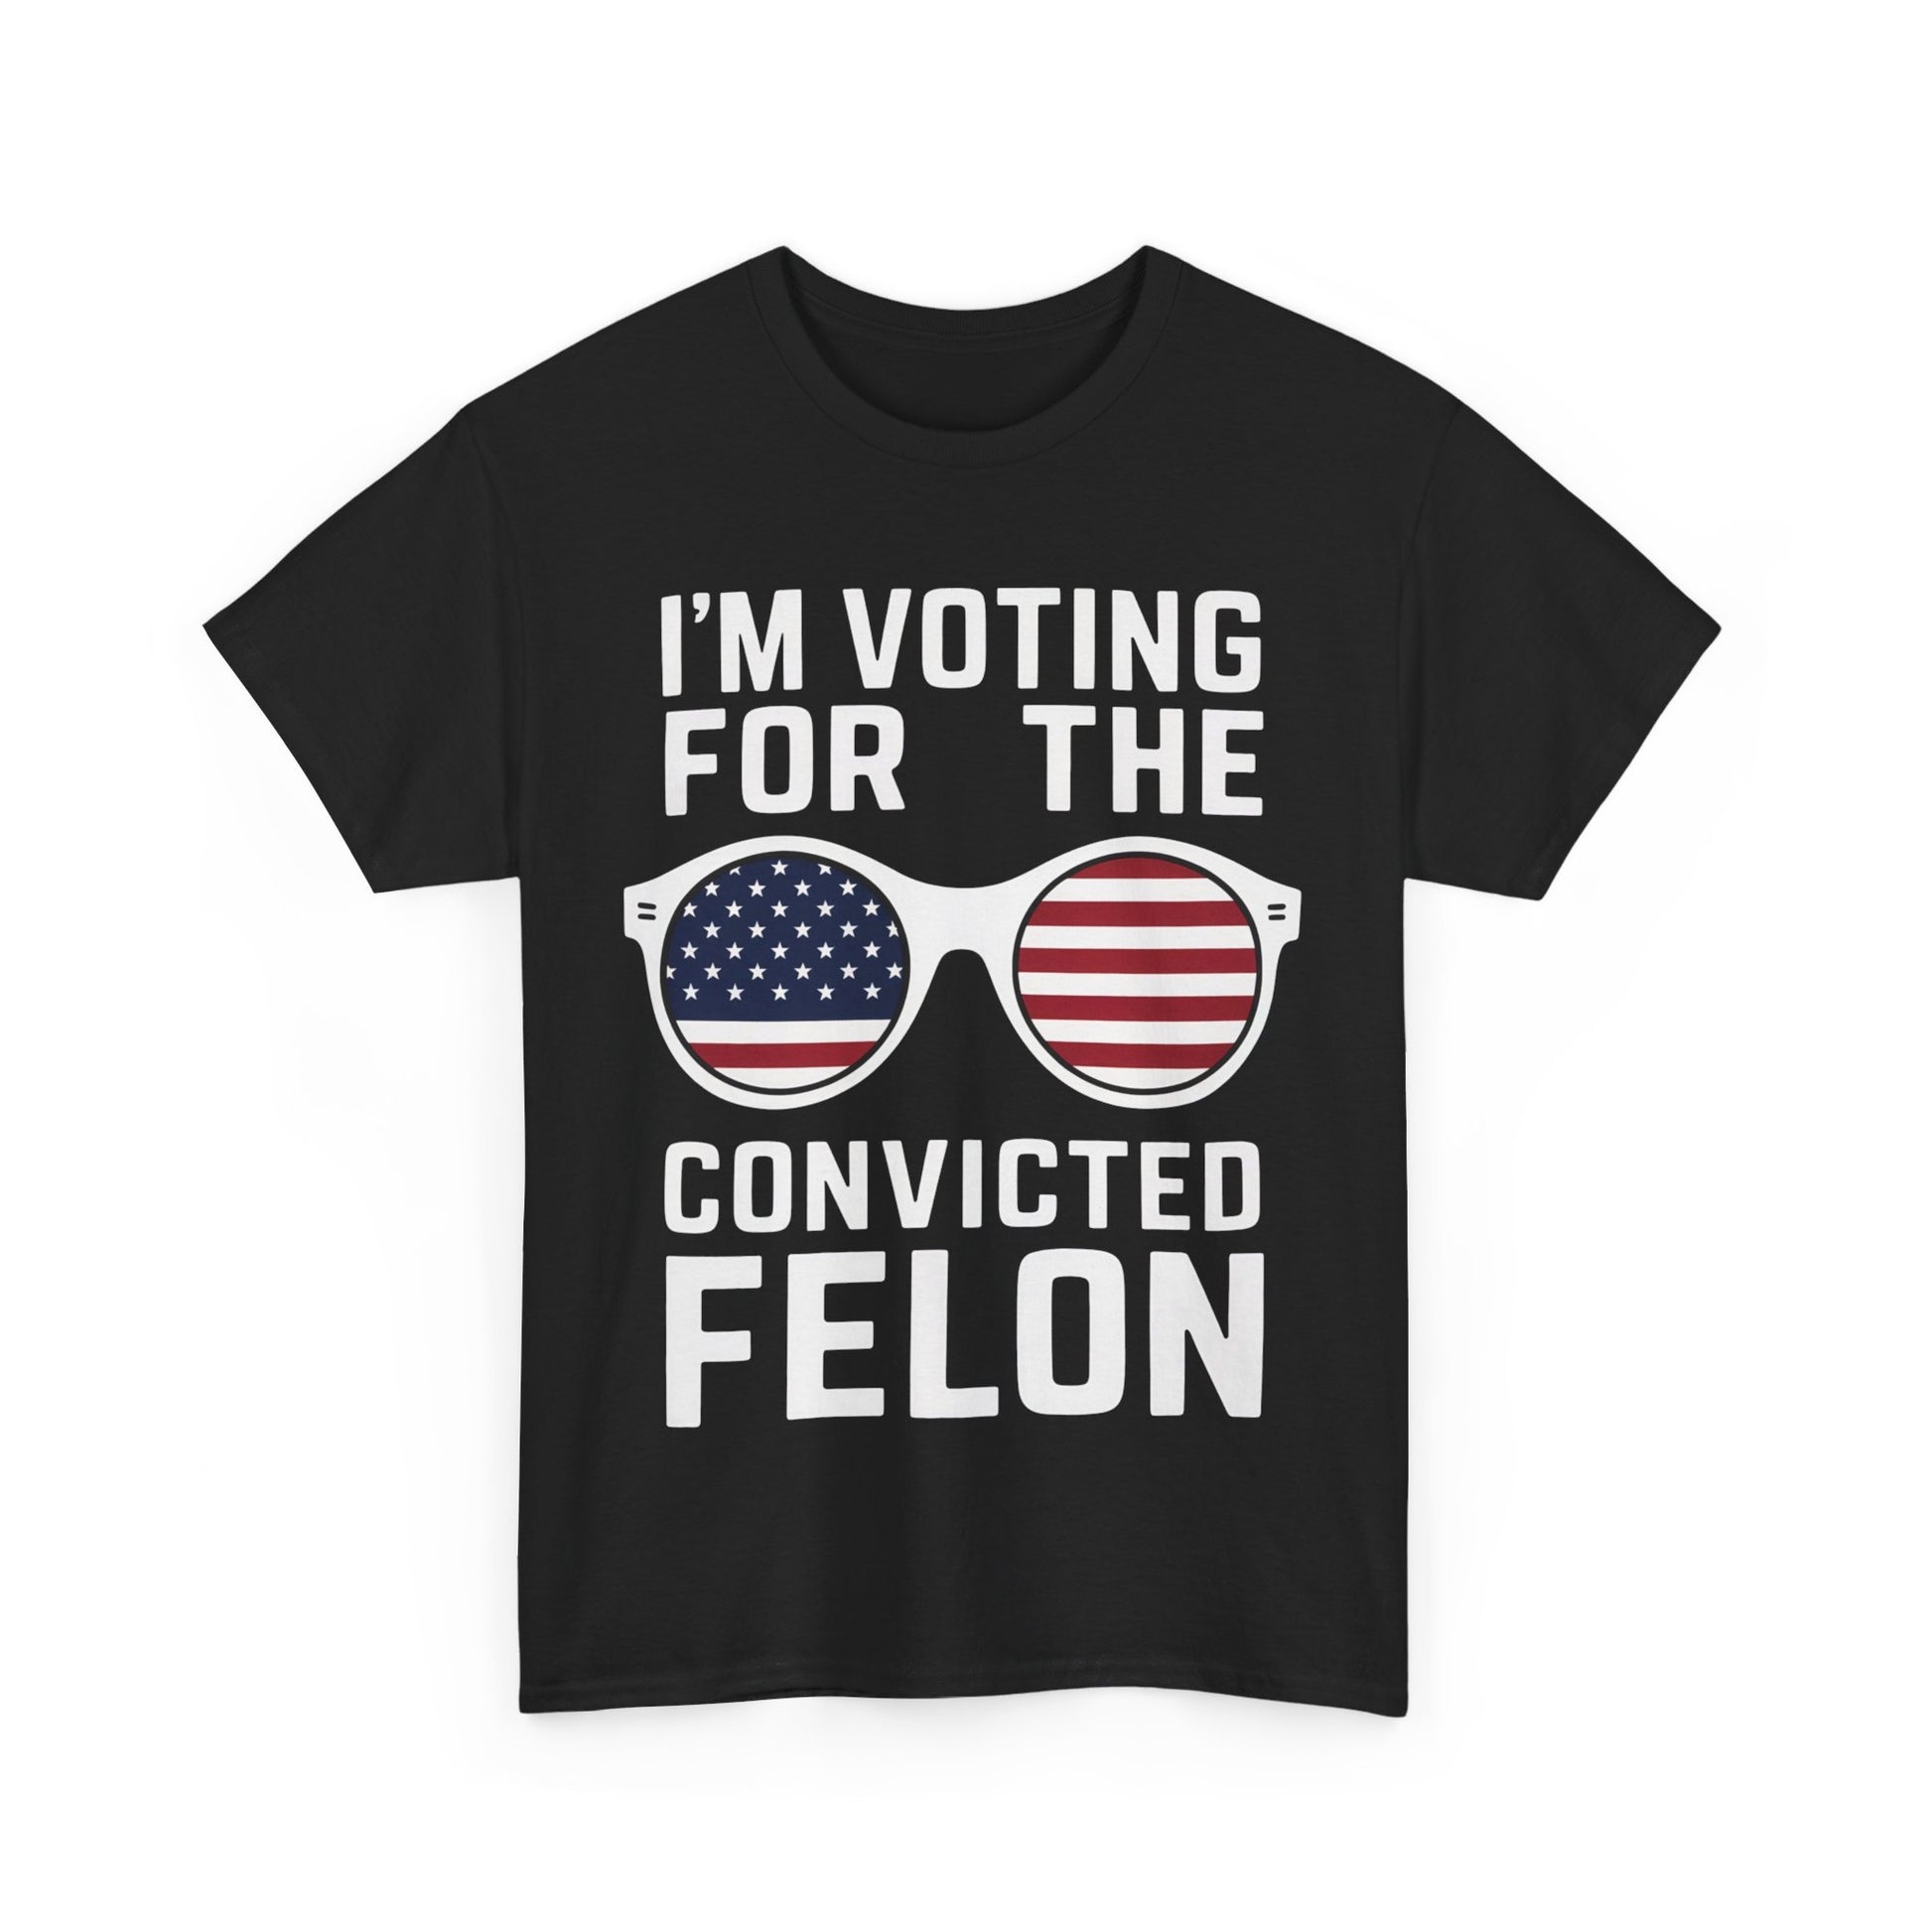 Get trendy with "I'm Voting for the convicted felon" Unisex Heavy Cotton Tee - T-Shirt available at Good Gift Company. Grab yours for $12 today!